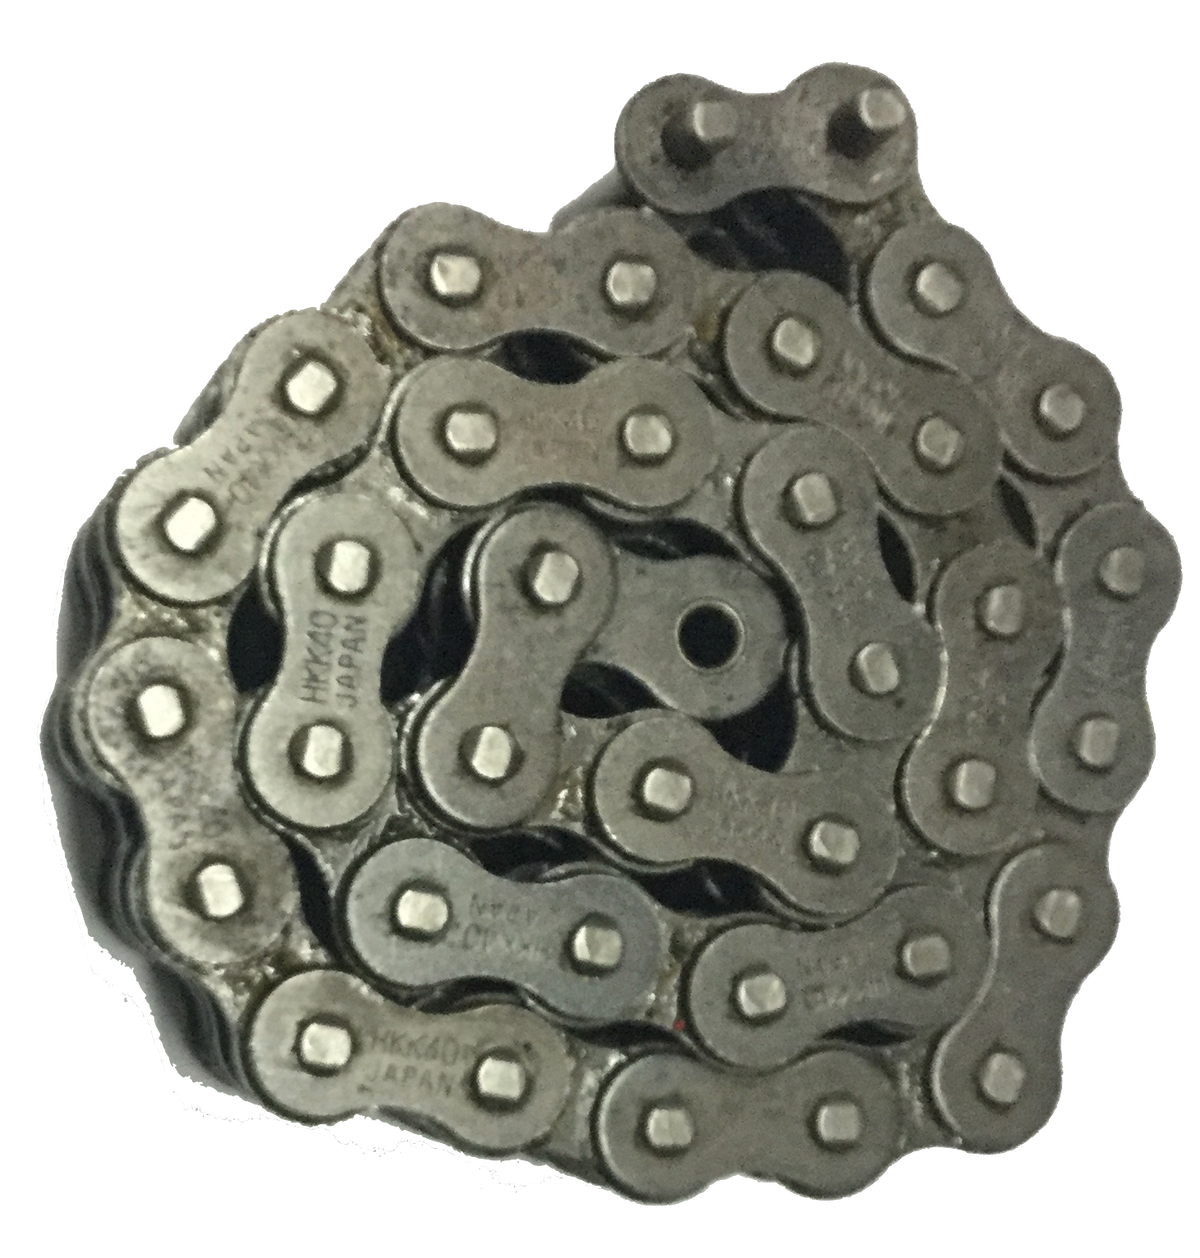 HKK 2-Strand #40 Standard Riveted Roller Chain (0.500" Pitch) - SOLD BY THE FOOT - Froedge Machine & Supply Co., Inc.